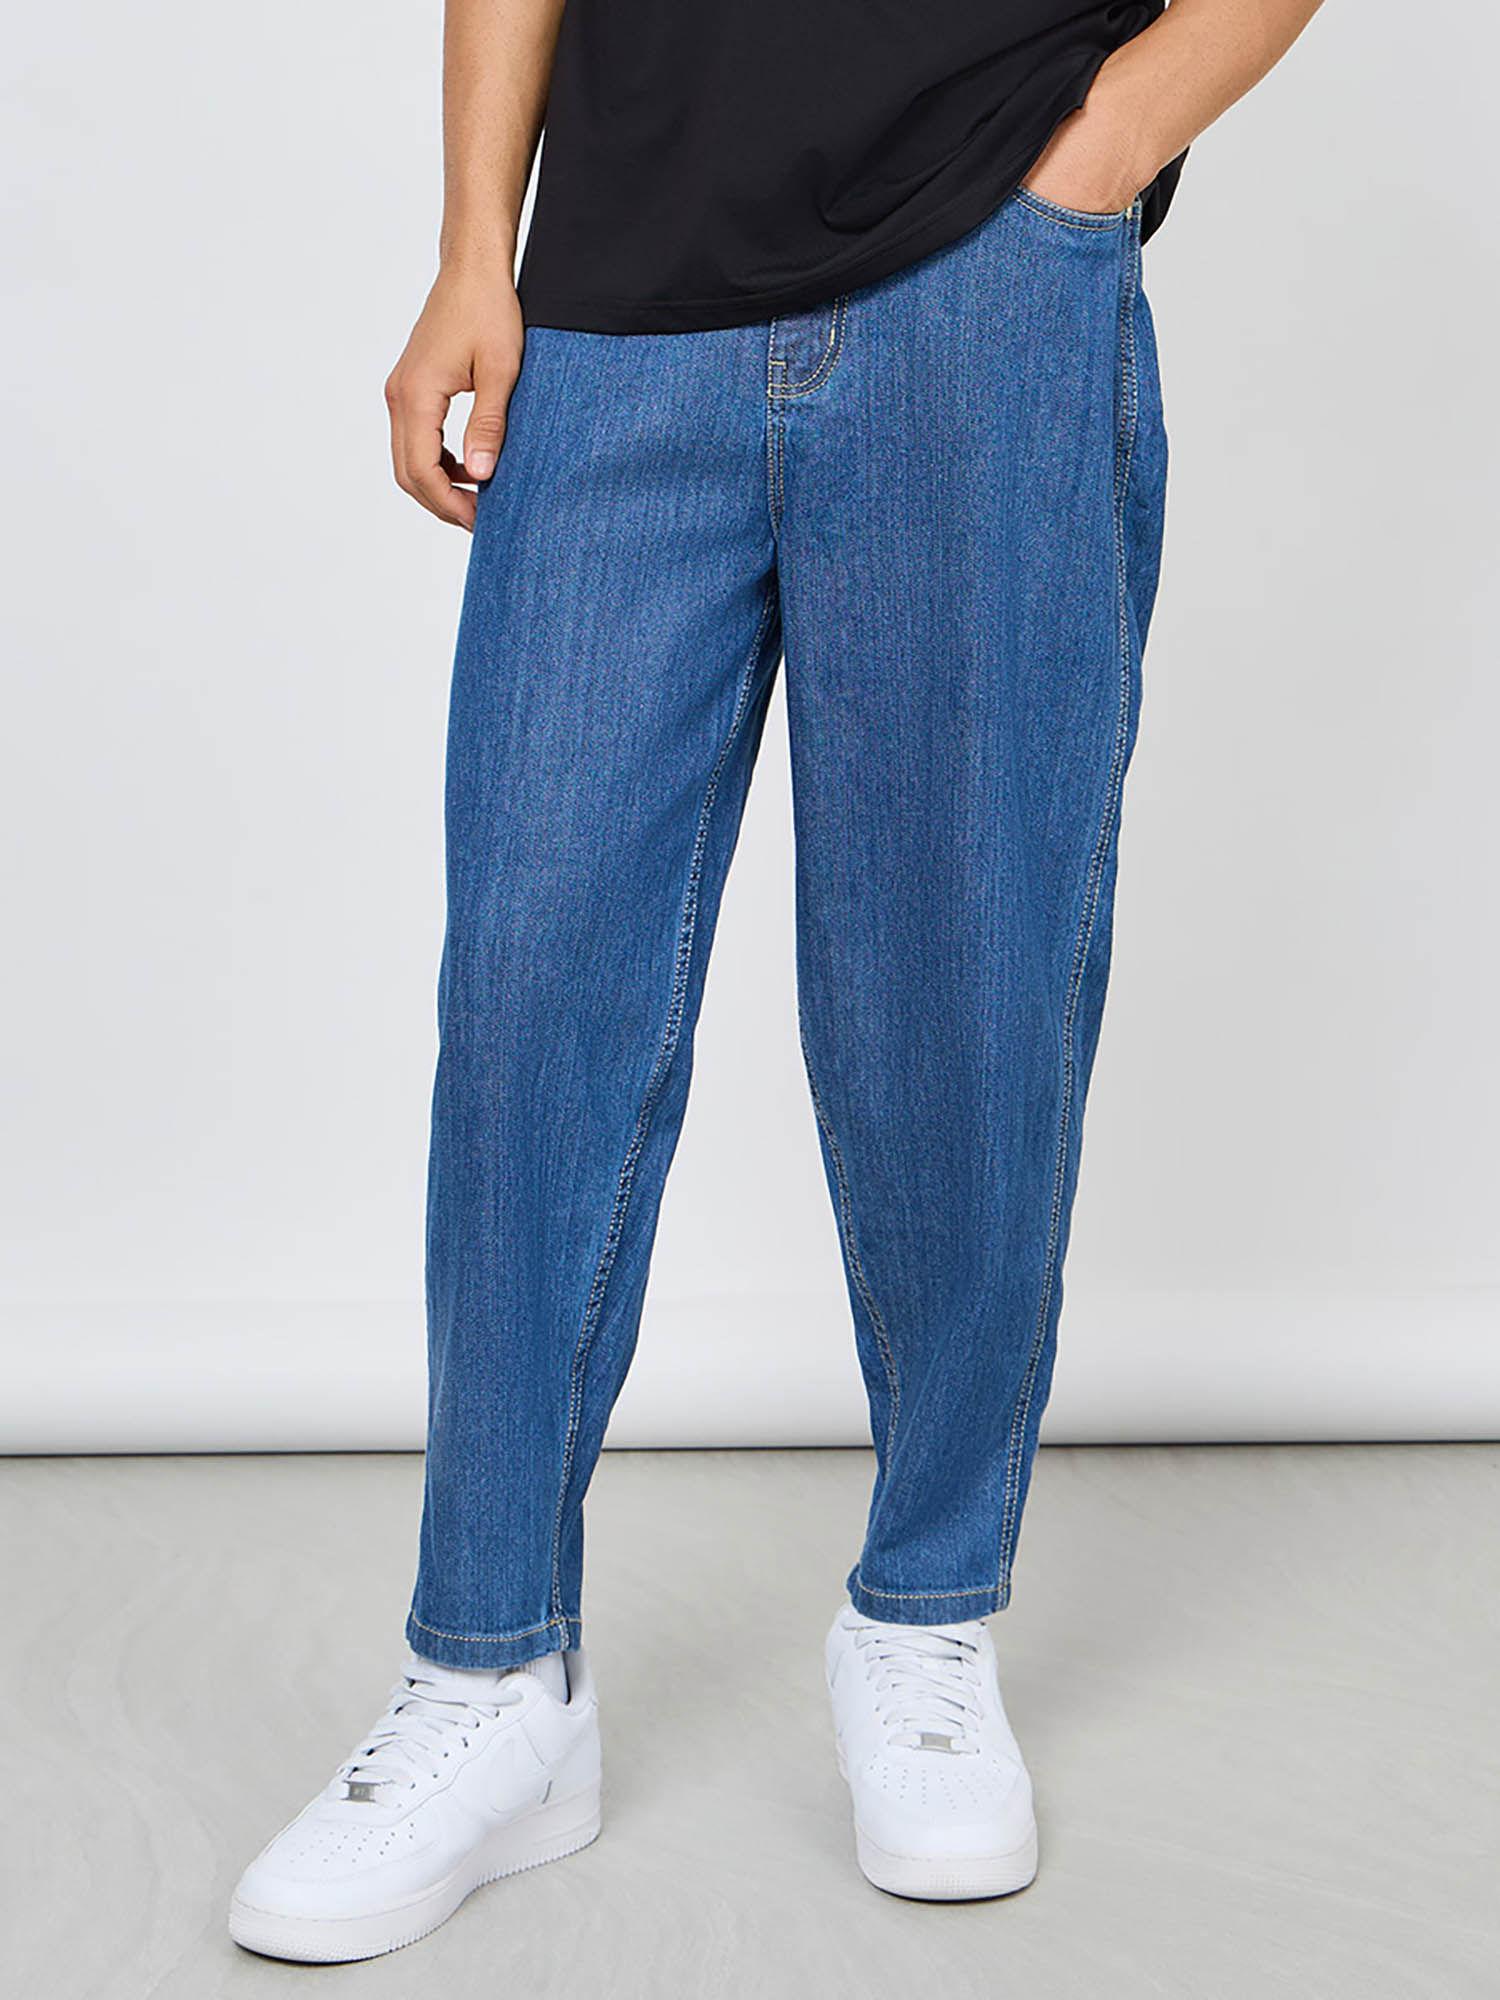 balloon-fit-jeans-with-pockets-blue